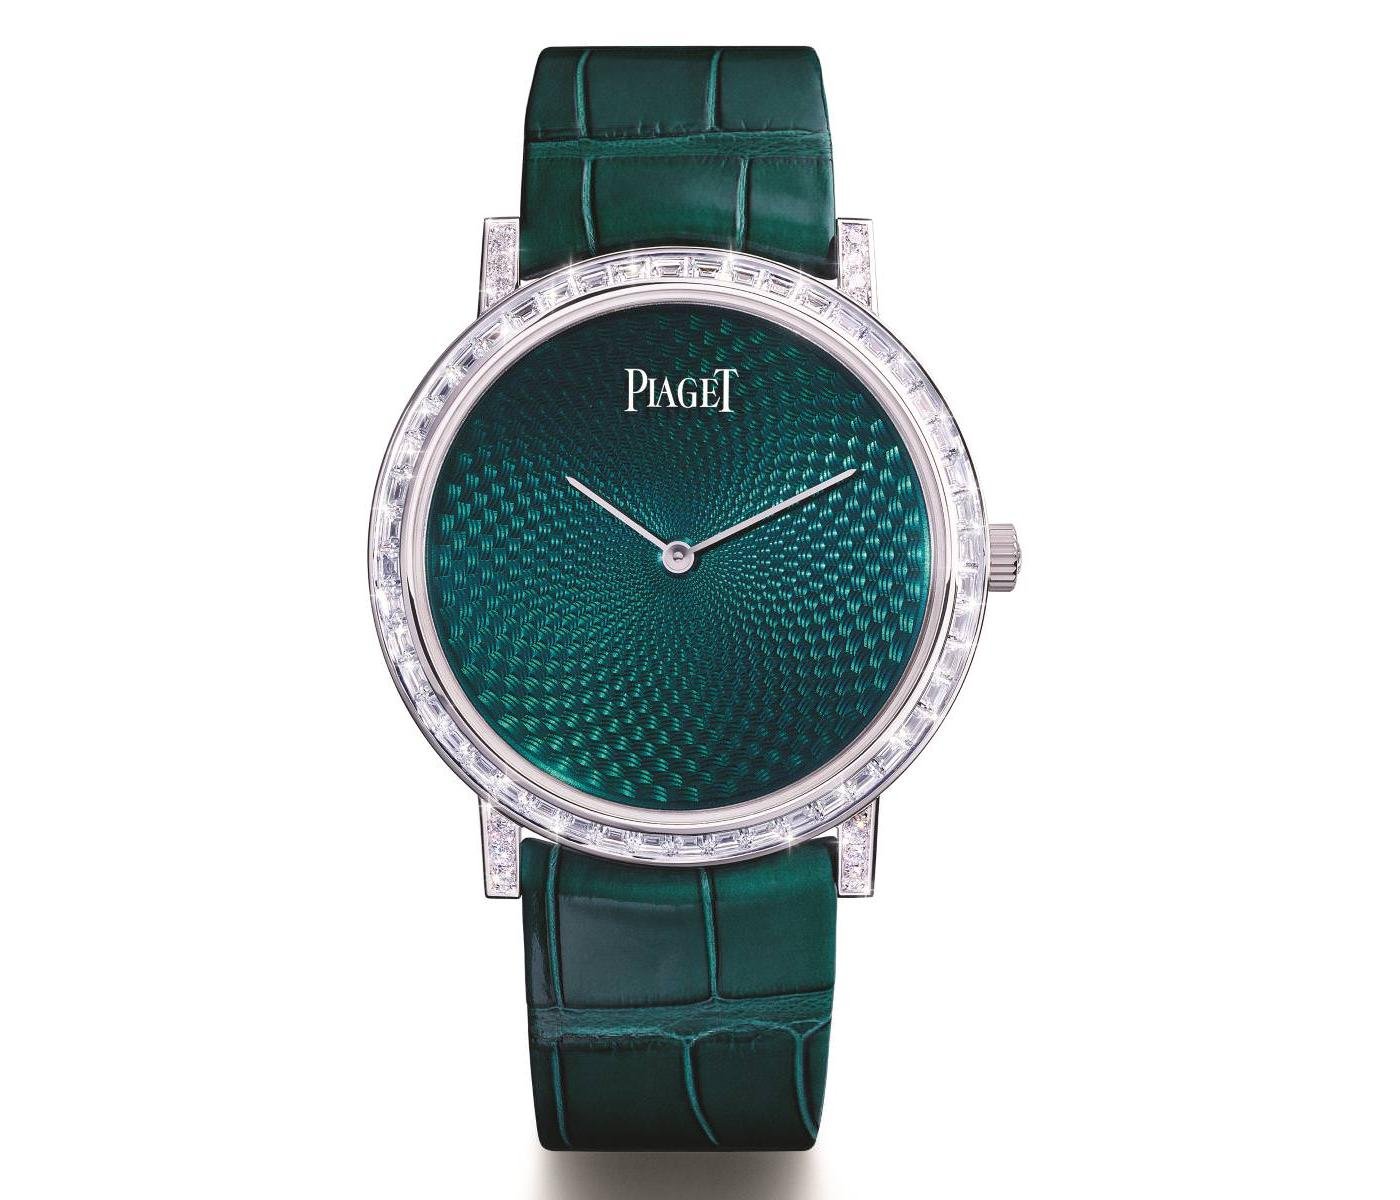 Watch by Piaget